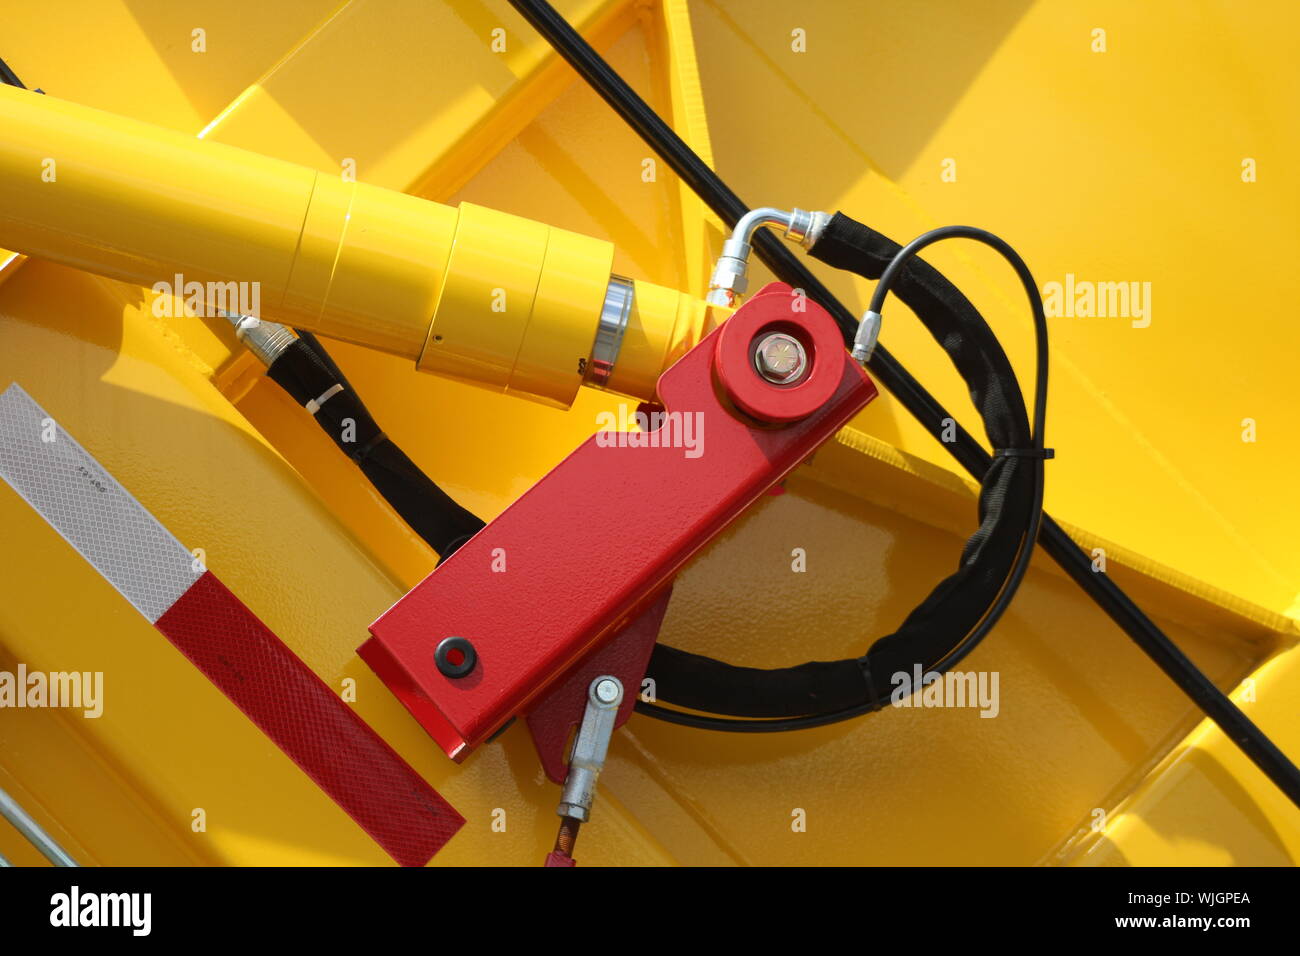 Full Frame Shot Of Yellow Commercial Land Vehicle Stock Photo